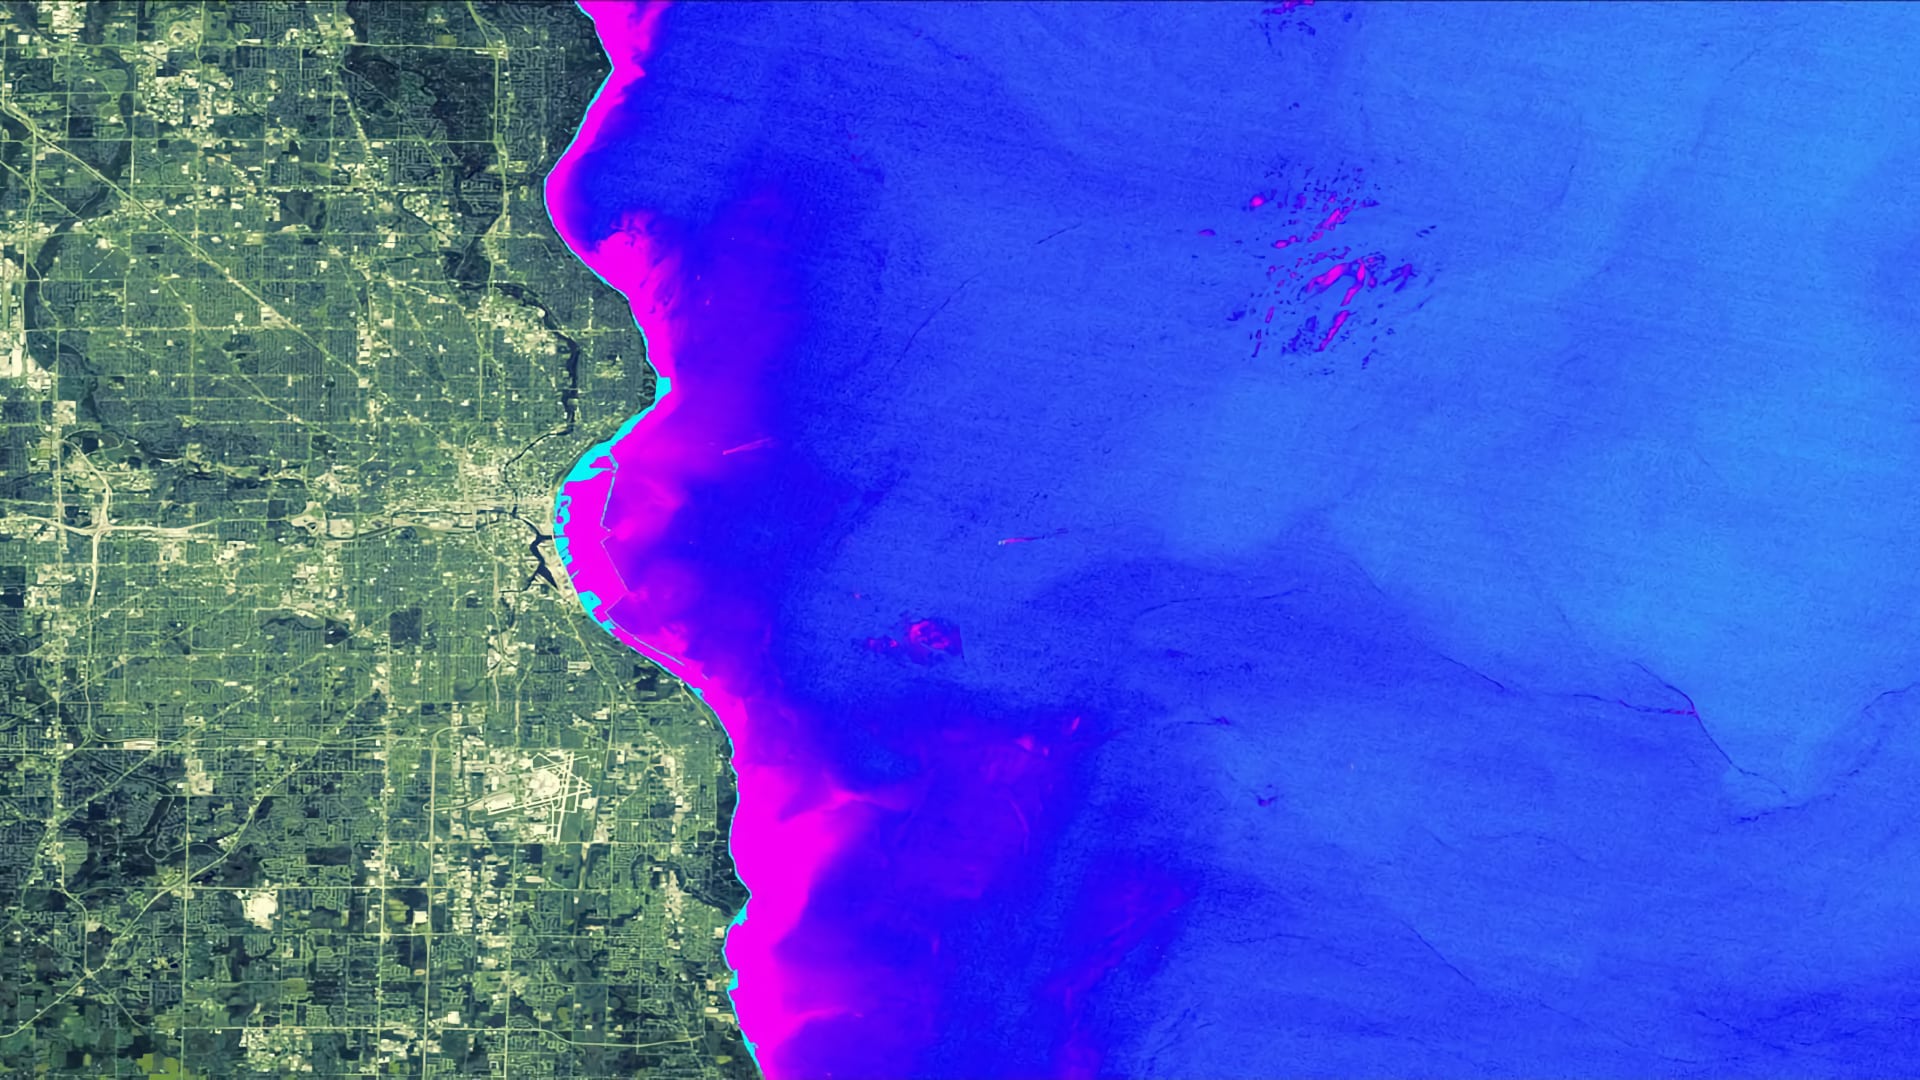 Utilizing NASA Earth Observations and Community Science to Detect and Map the Displacement of Cladophora along the Milwaukee County Shoreline